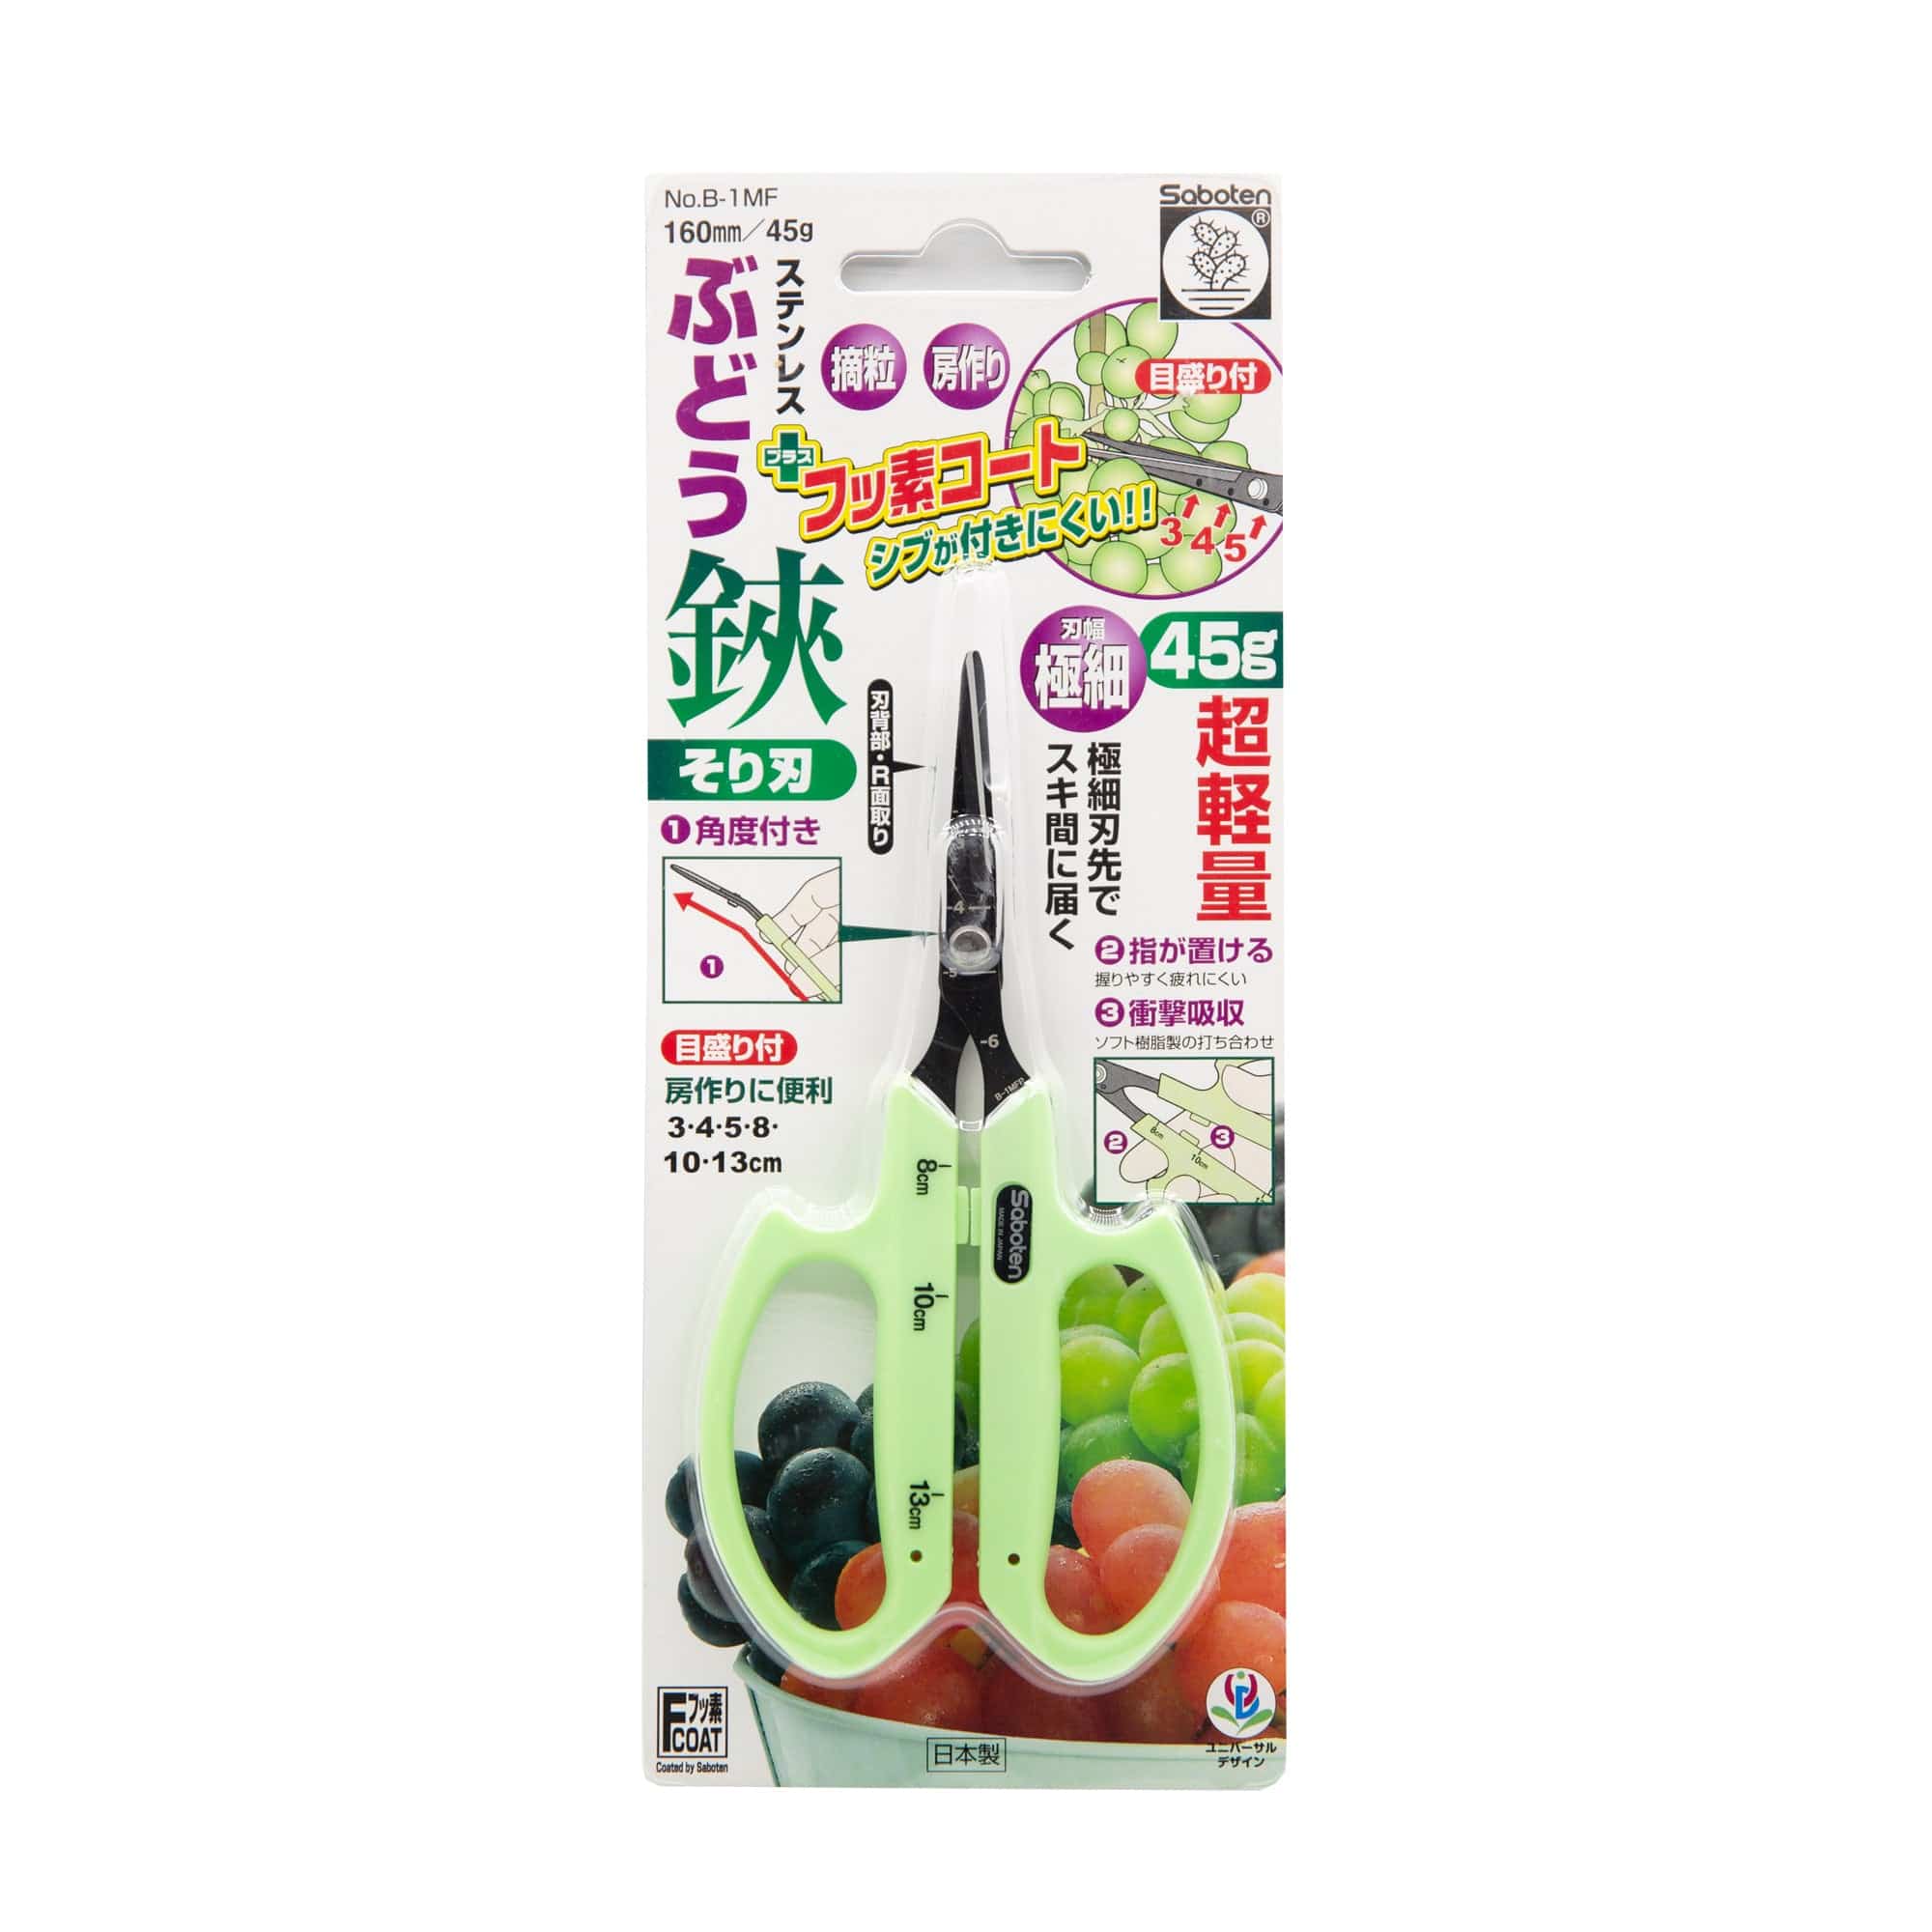 Dr Greenthumbs Saboten Trimming Scissors (Curved / Straight Blade)